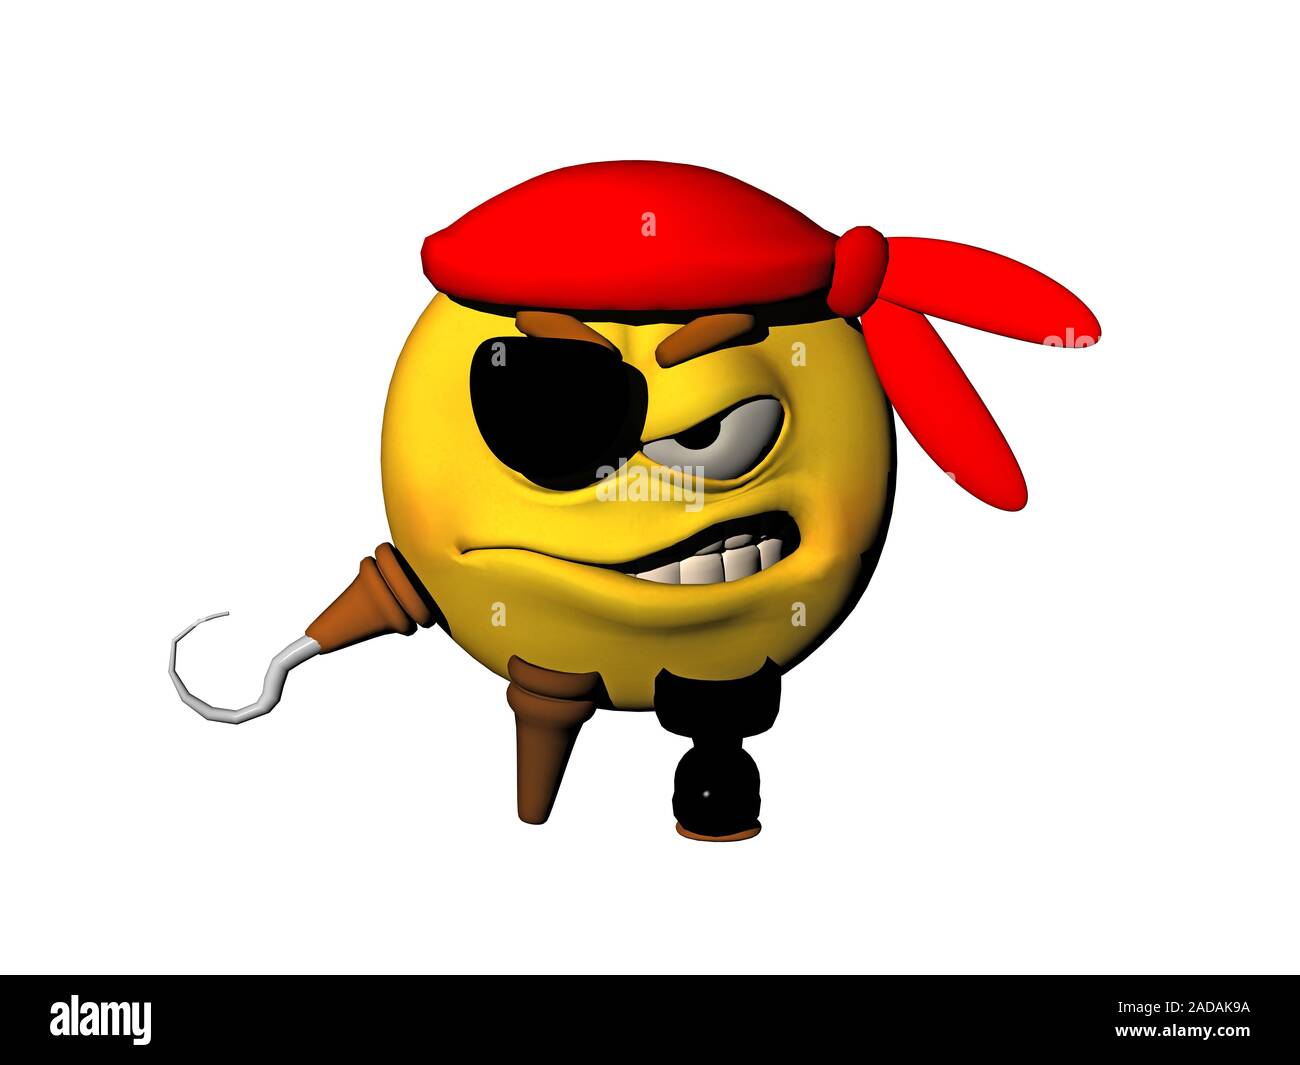 Pirate with eye patch, hook hand and red cap Stock Photo